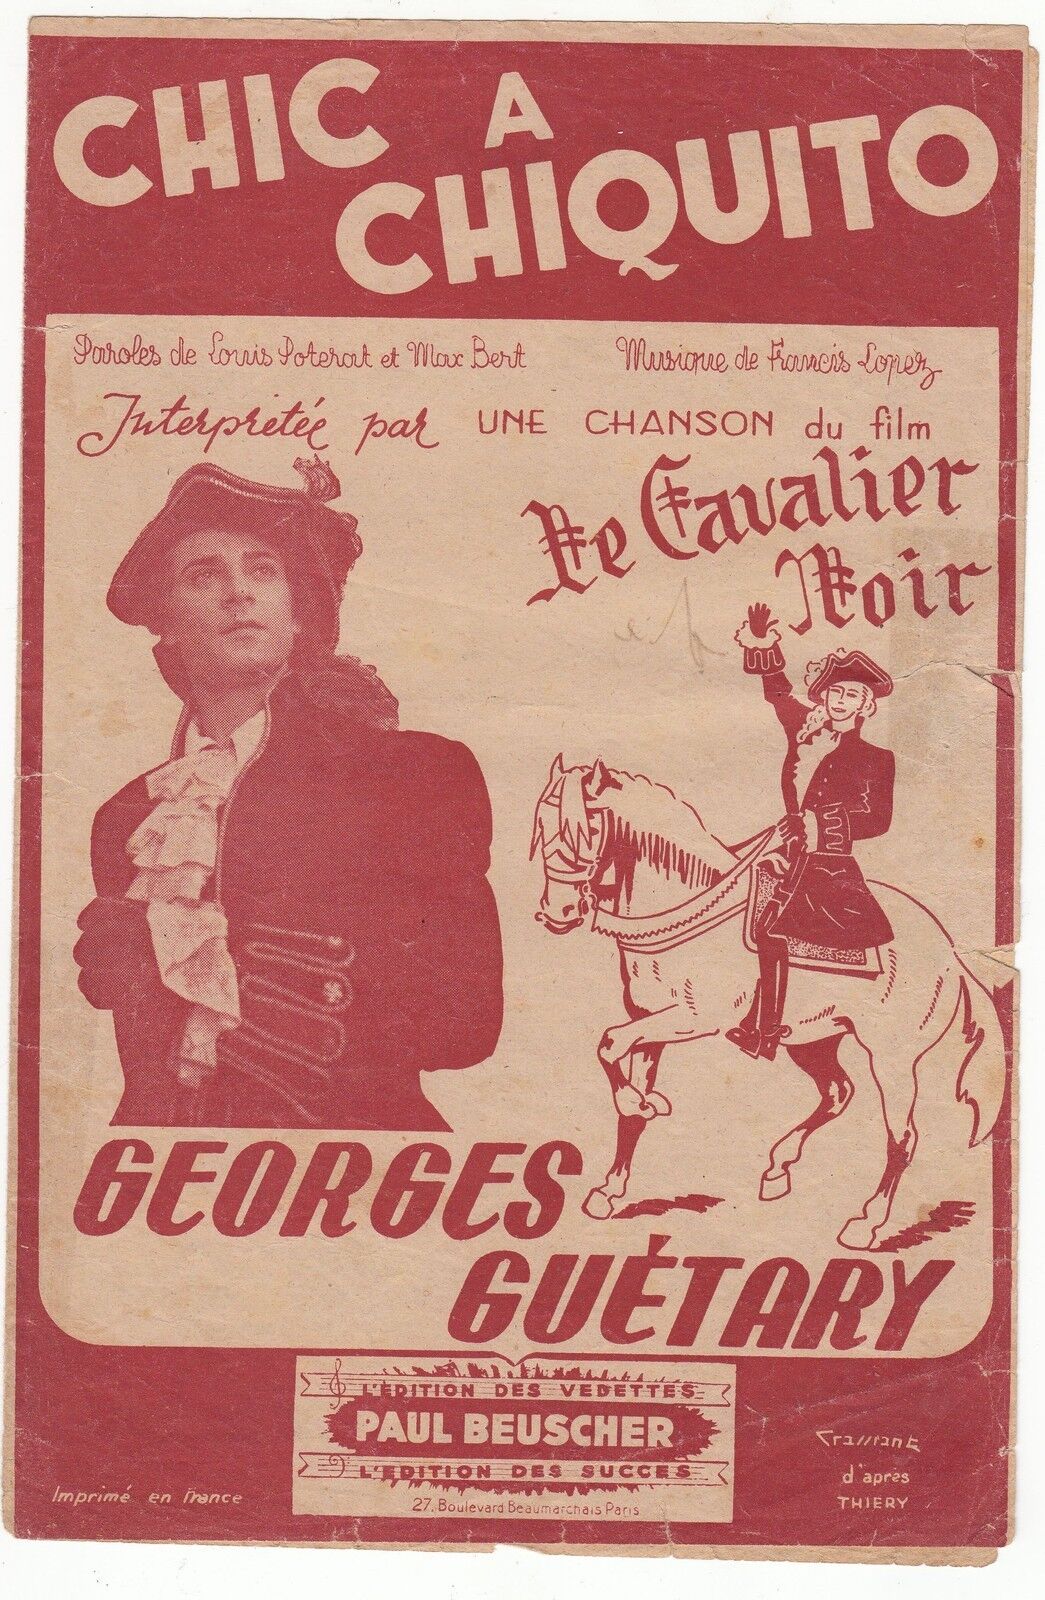 PARTITION ANCIENNE CHIC A CHIQUITO FILM LE CHEVALIER NOIR GEORGES GUETARY 121891653320